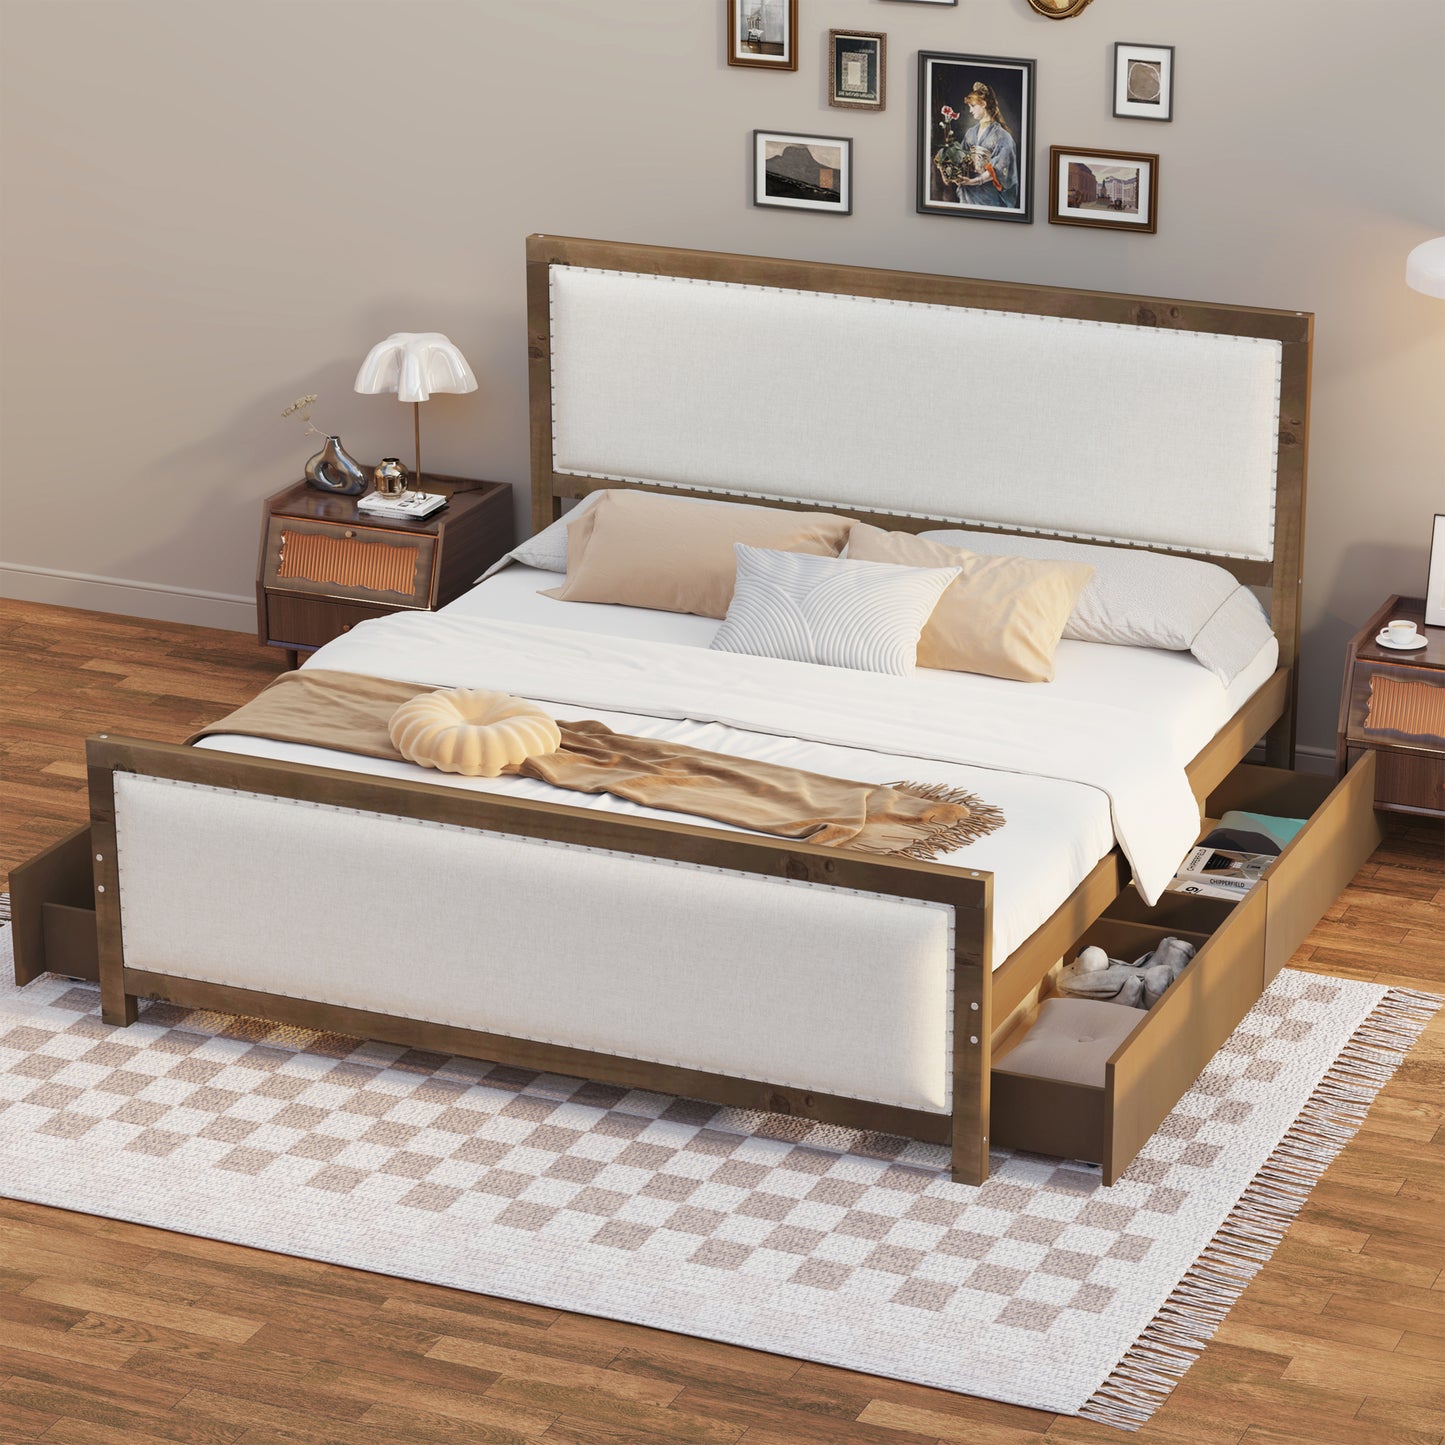 Queen Size Upholstered Platform Bed with Wood Frame and 4 Drawers, Natural Wooden+Beige Fabric - Enova Luxe Home Store